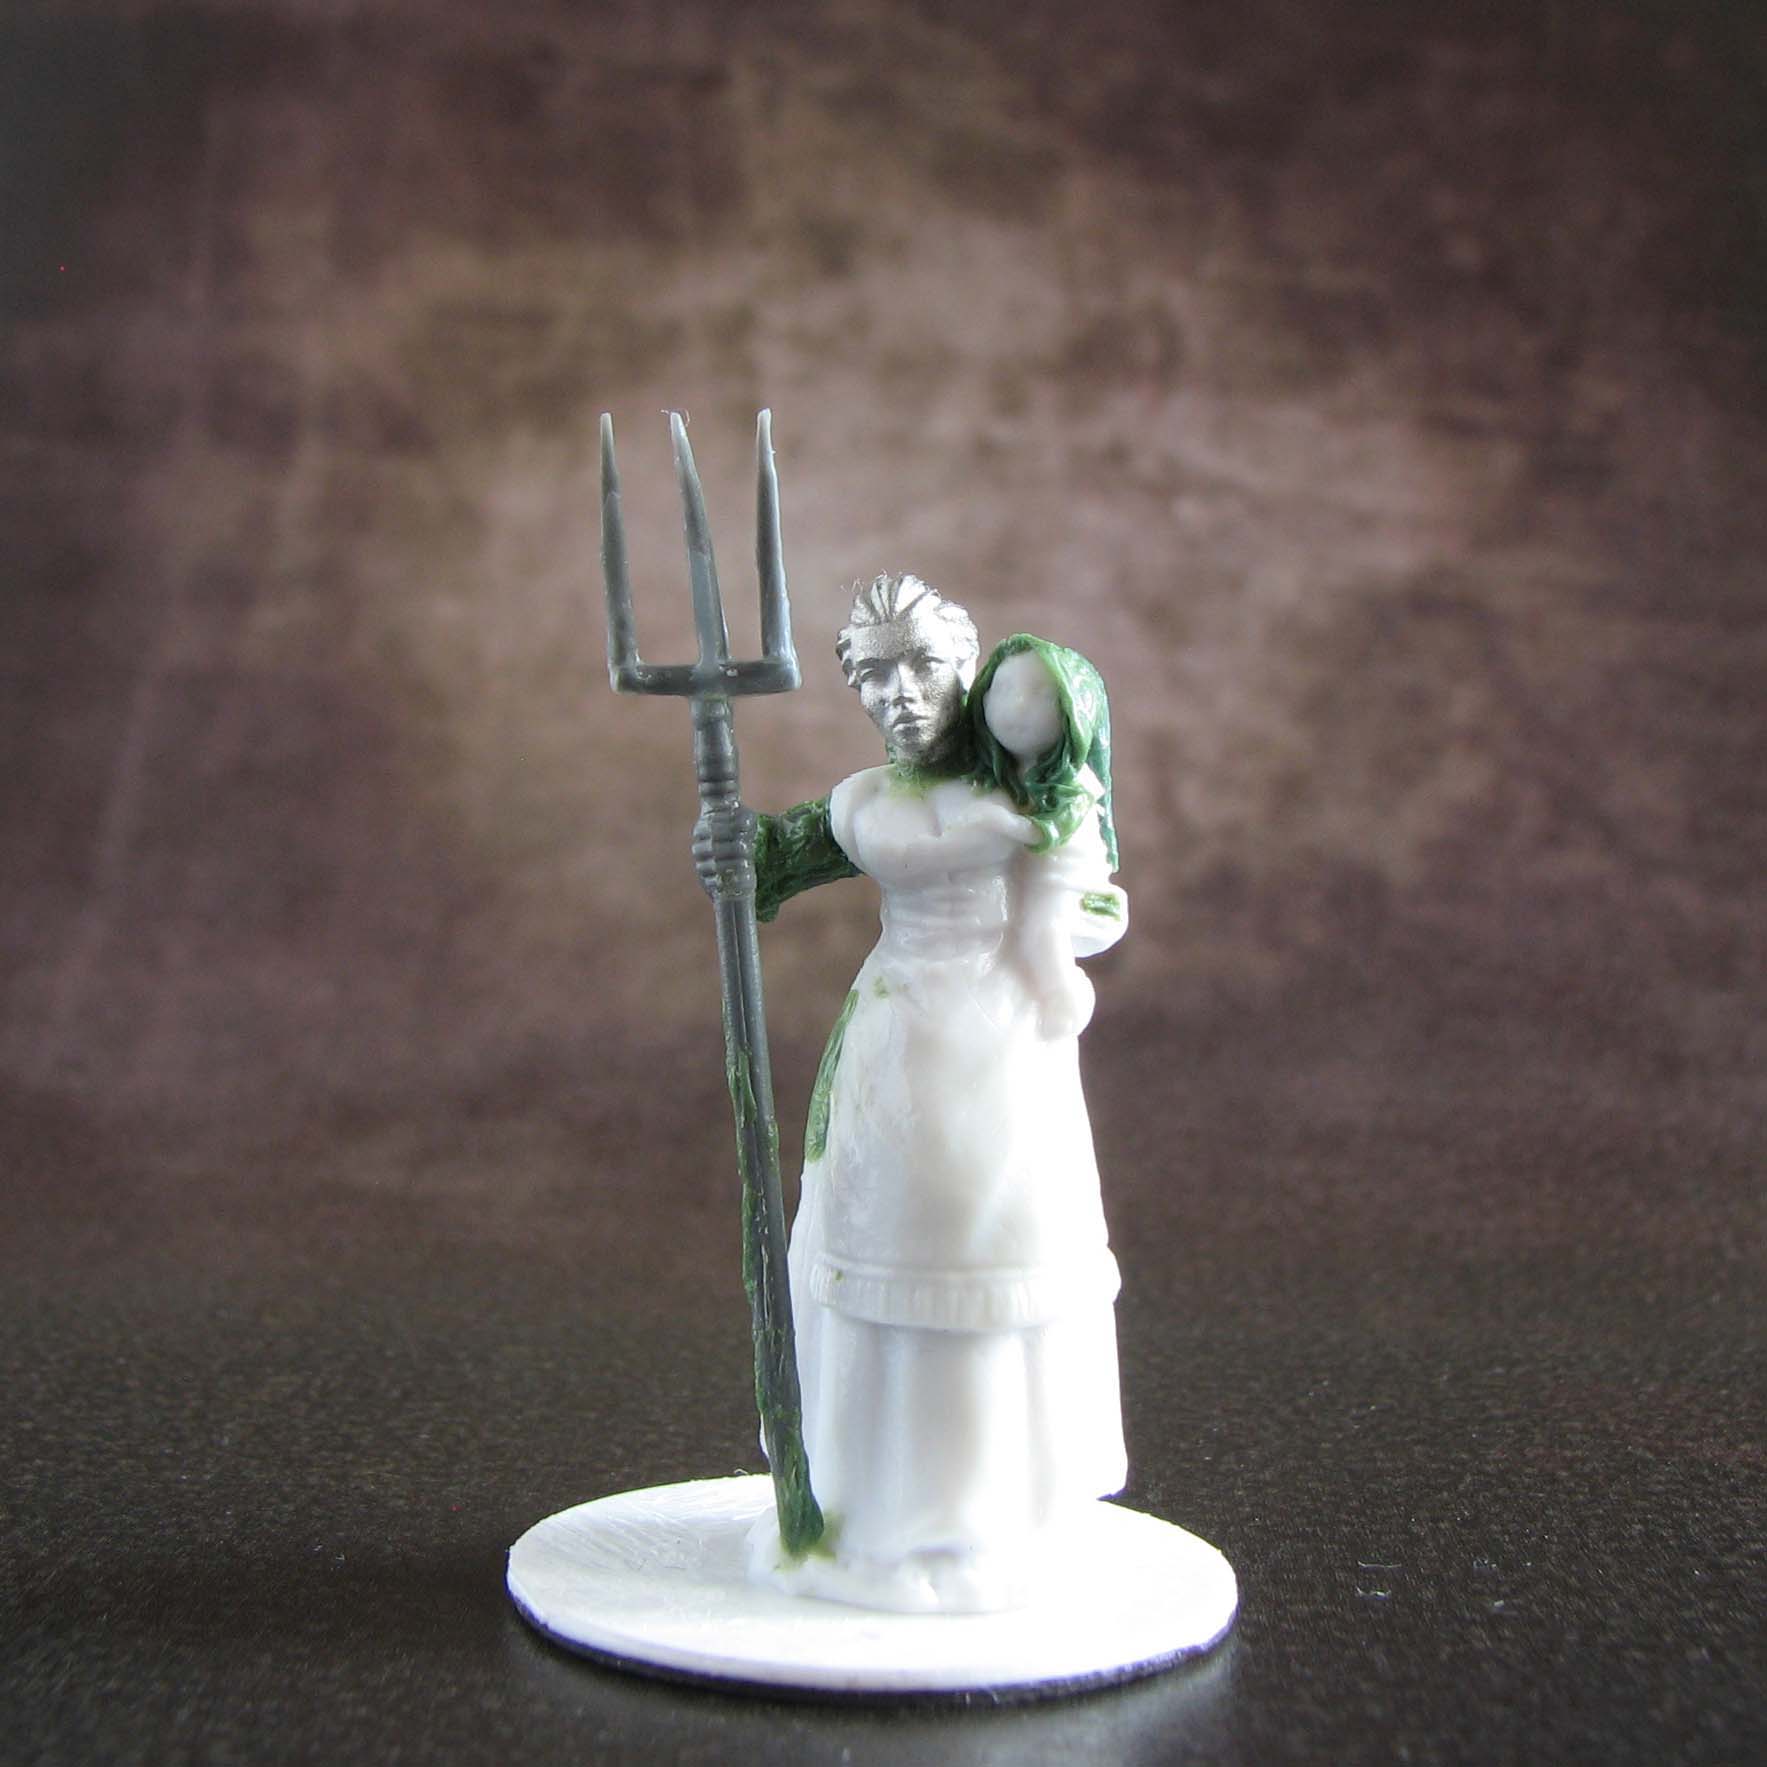 Reaper Bones, Townsfolk, Conversions, Mother with child, Pitchfork, Statuesque heads